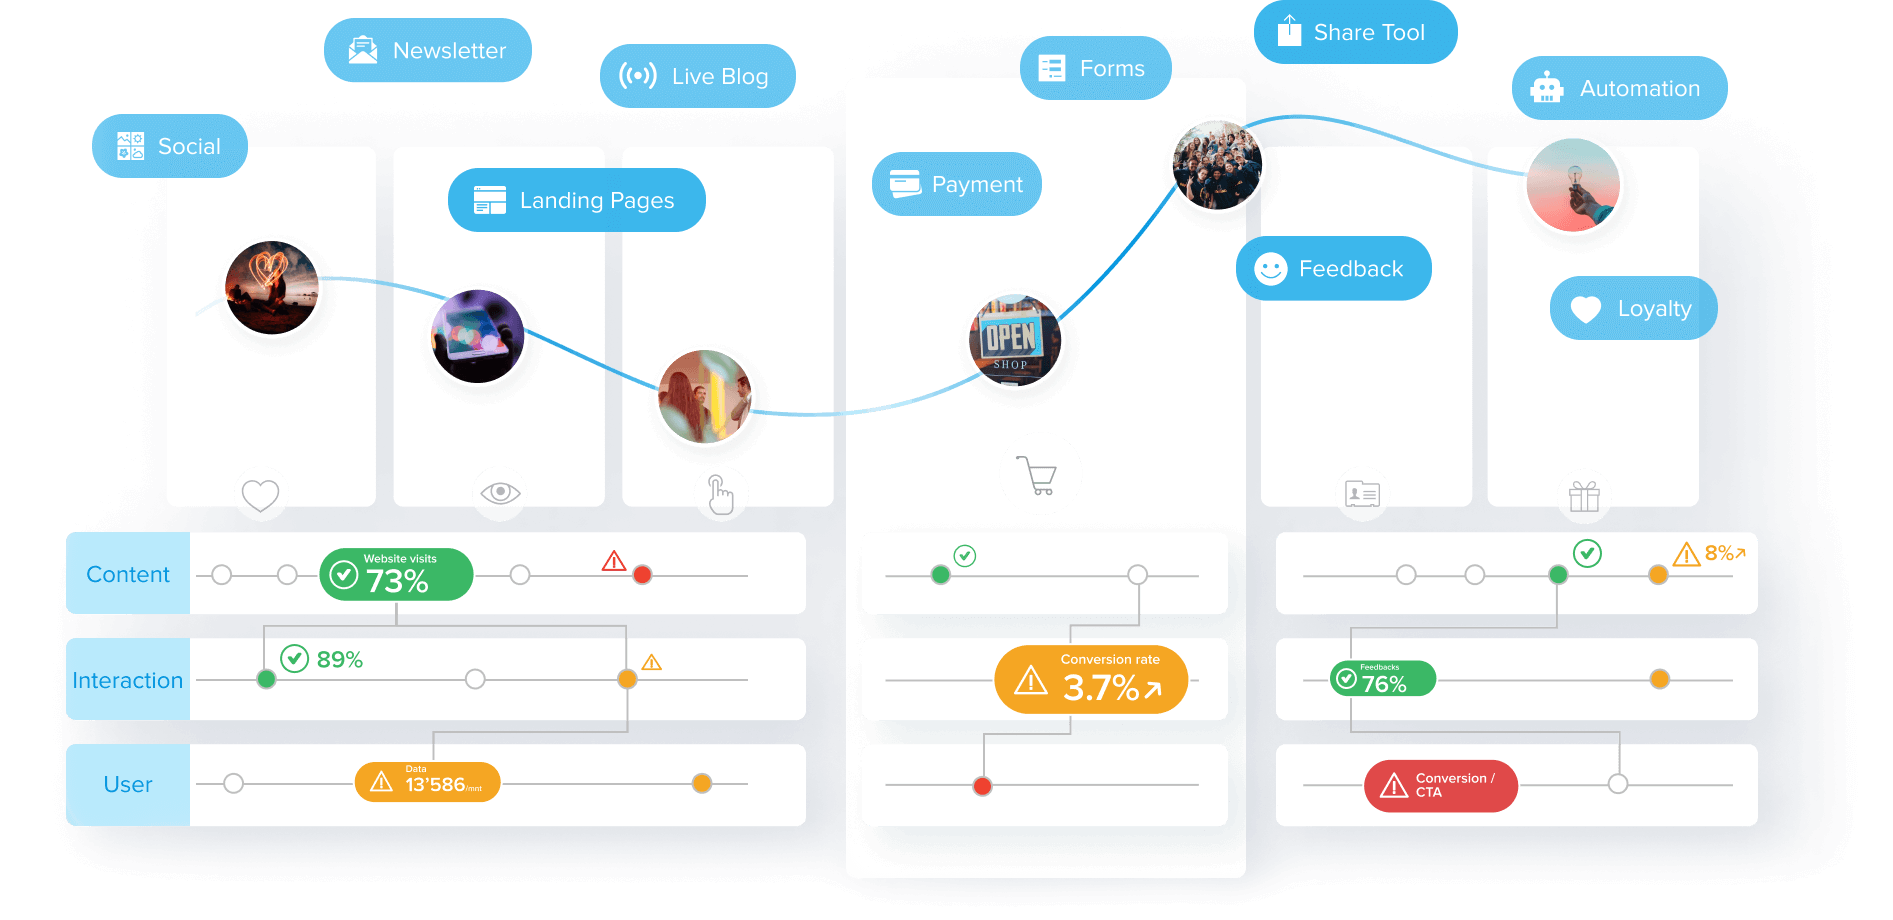 yawave user interaction suite